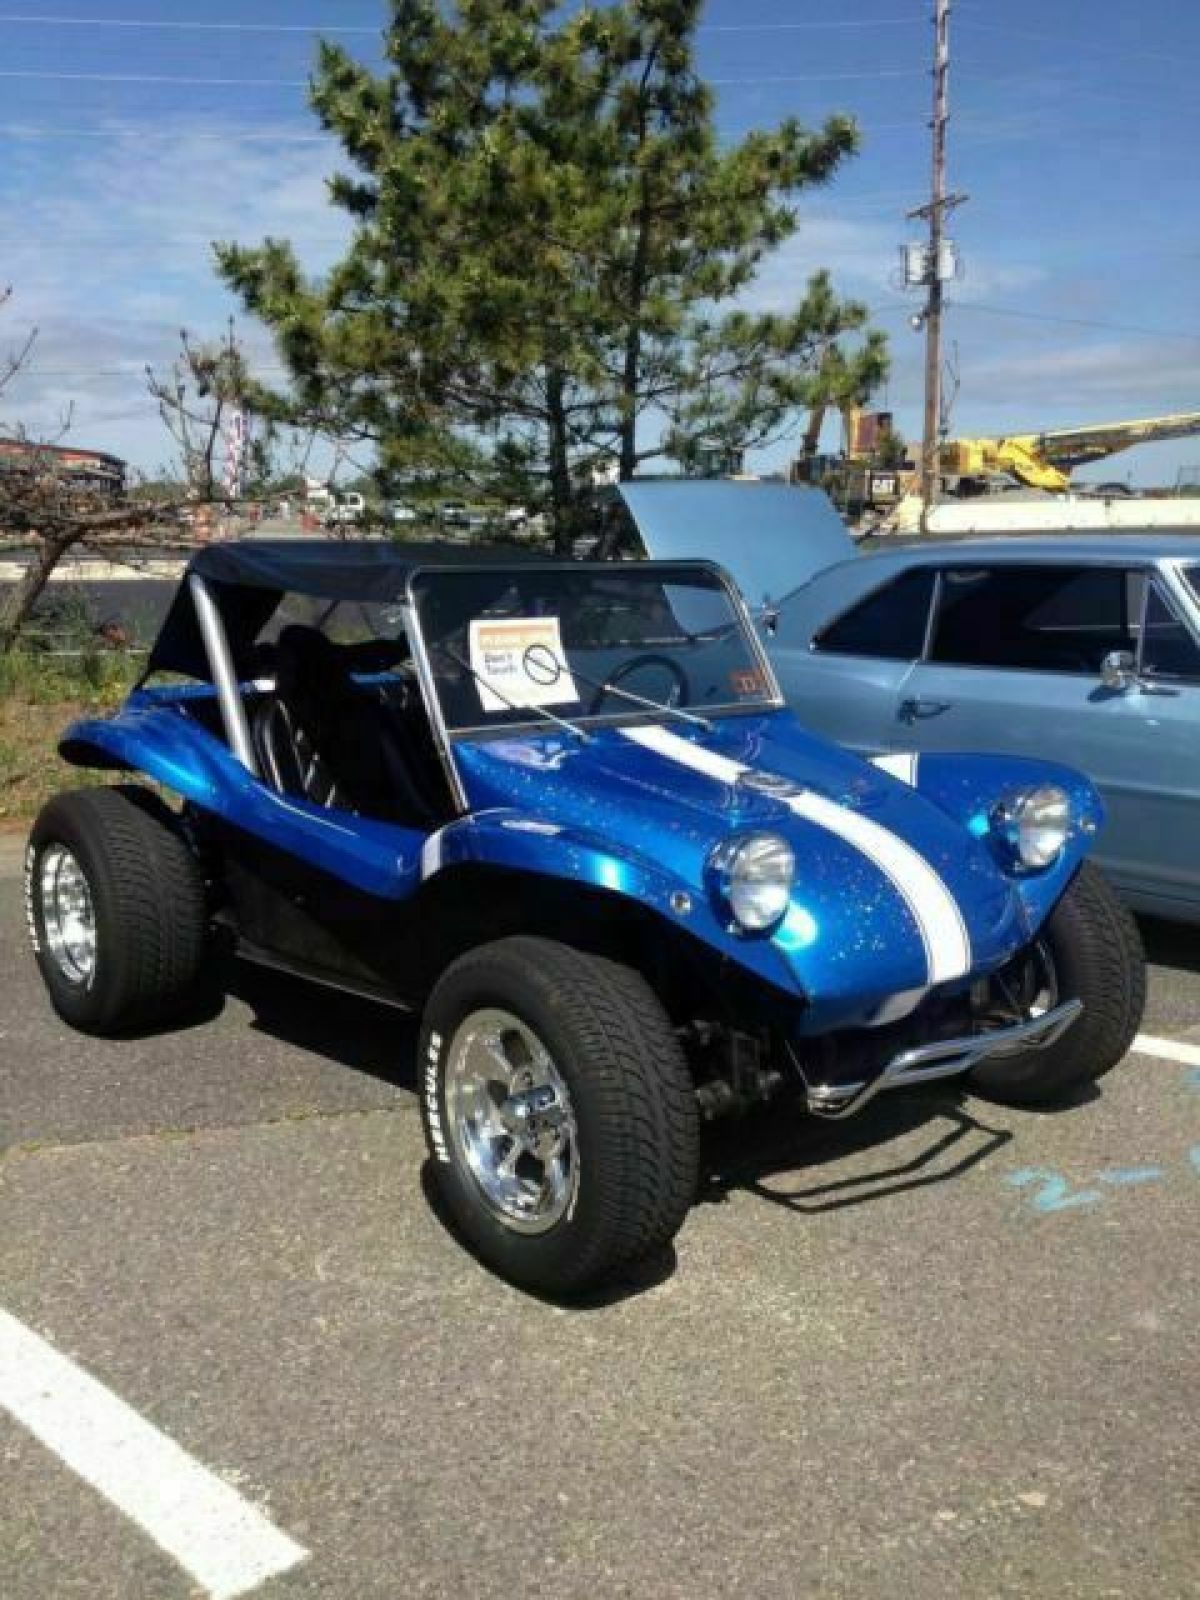 GORGEOUS 1968 VW/VOLKSWAGEN STREET LEGAL DUNE BUGGY! for sale